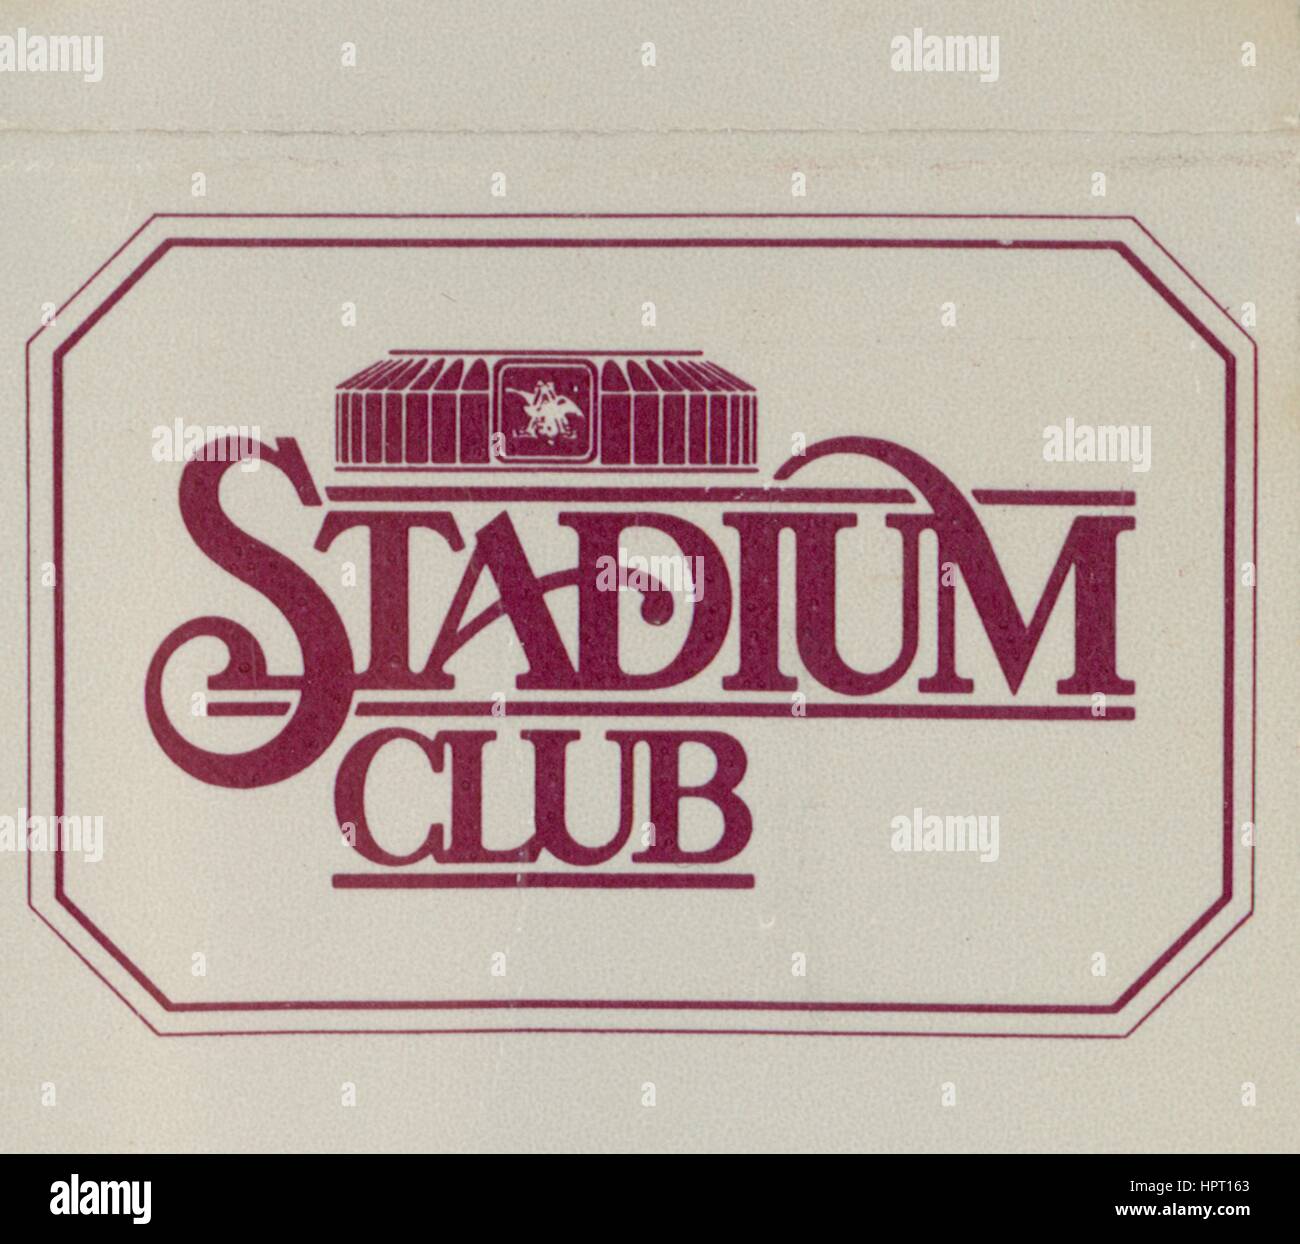 Matchbook cover advertisement for the Stadium Club, a restaurant in Saint Louis, Missouri, 1965. Stock Photo